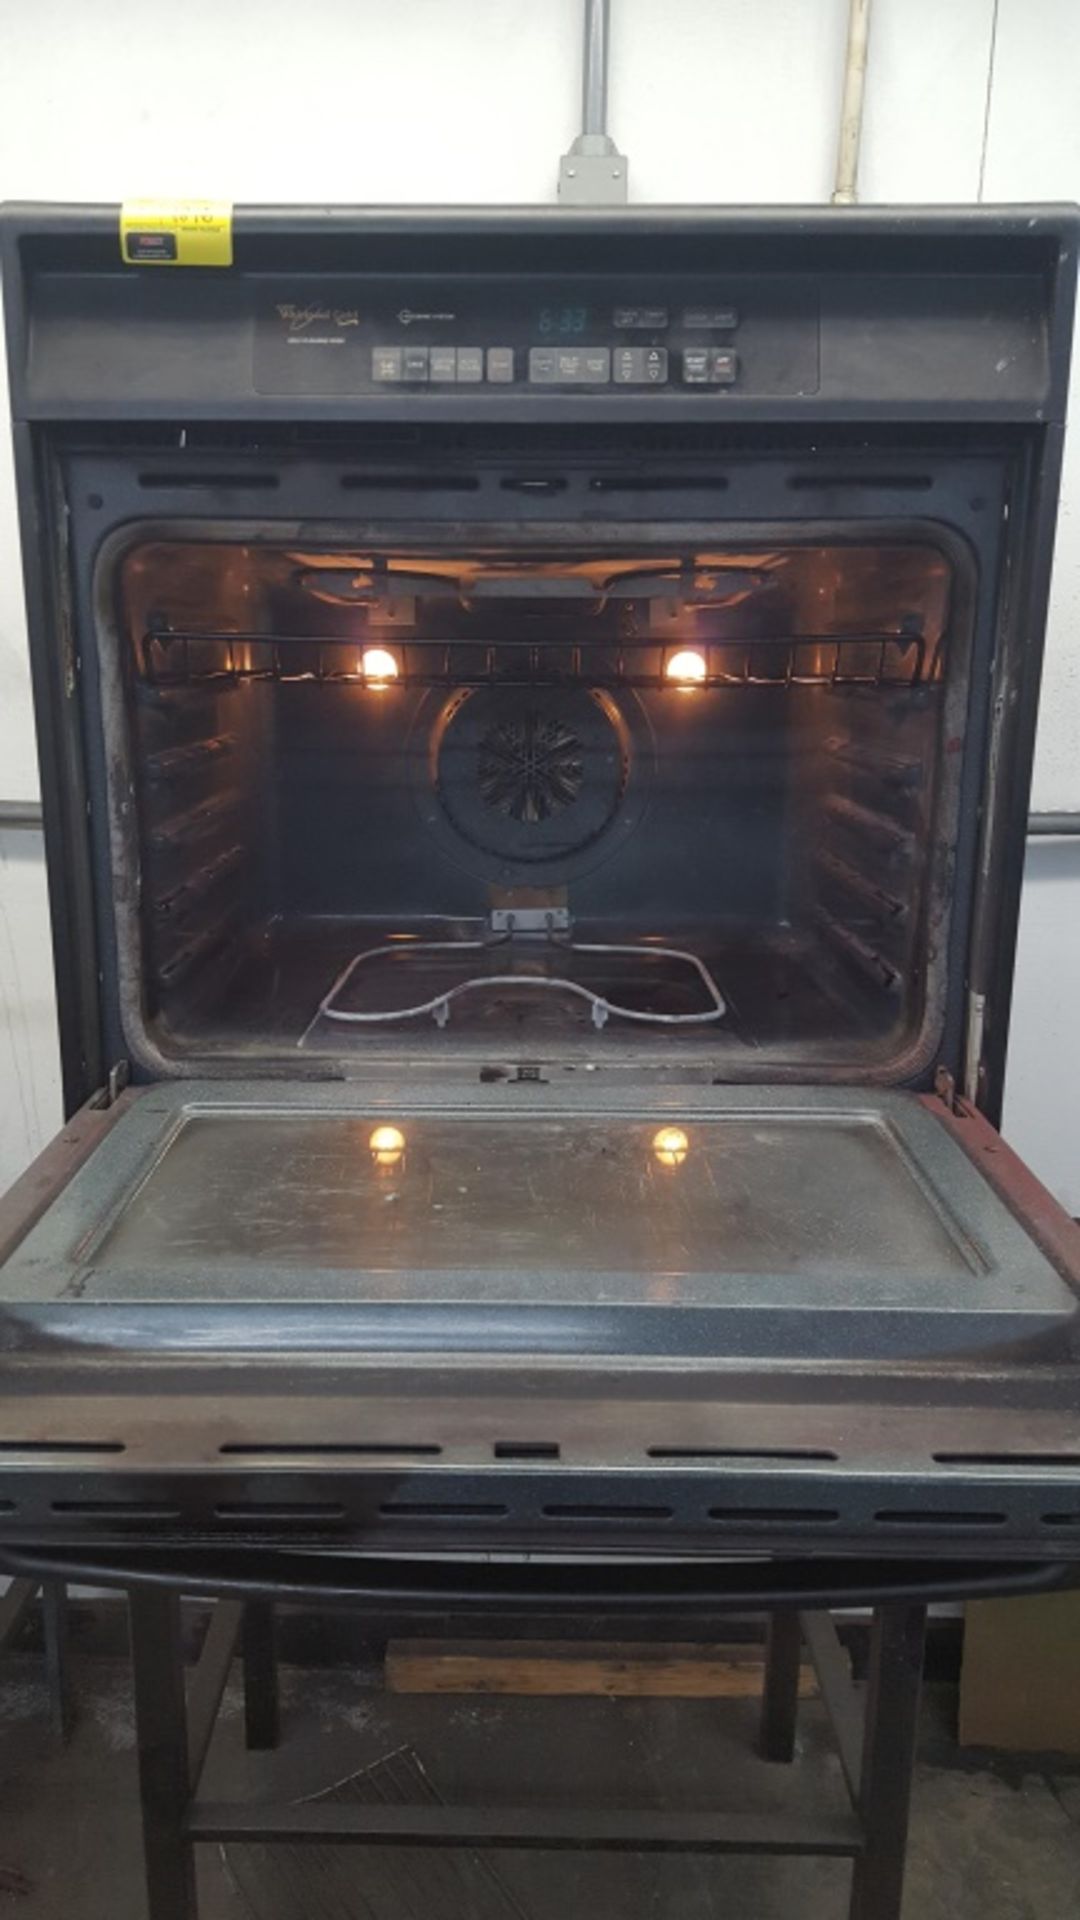 Whirlpool Gold Oven - Image 2 of 2